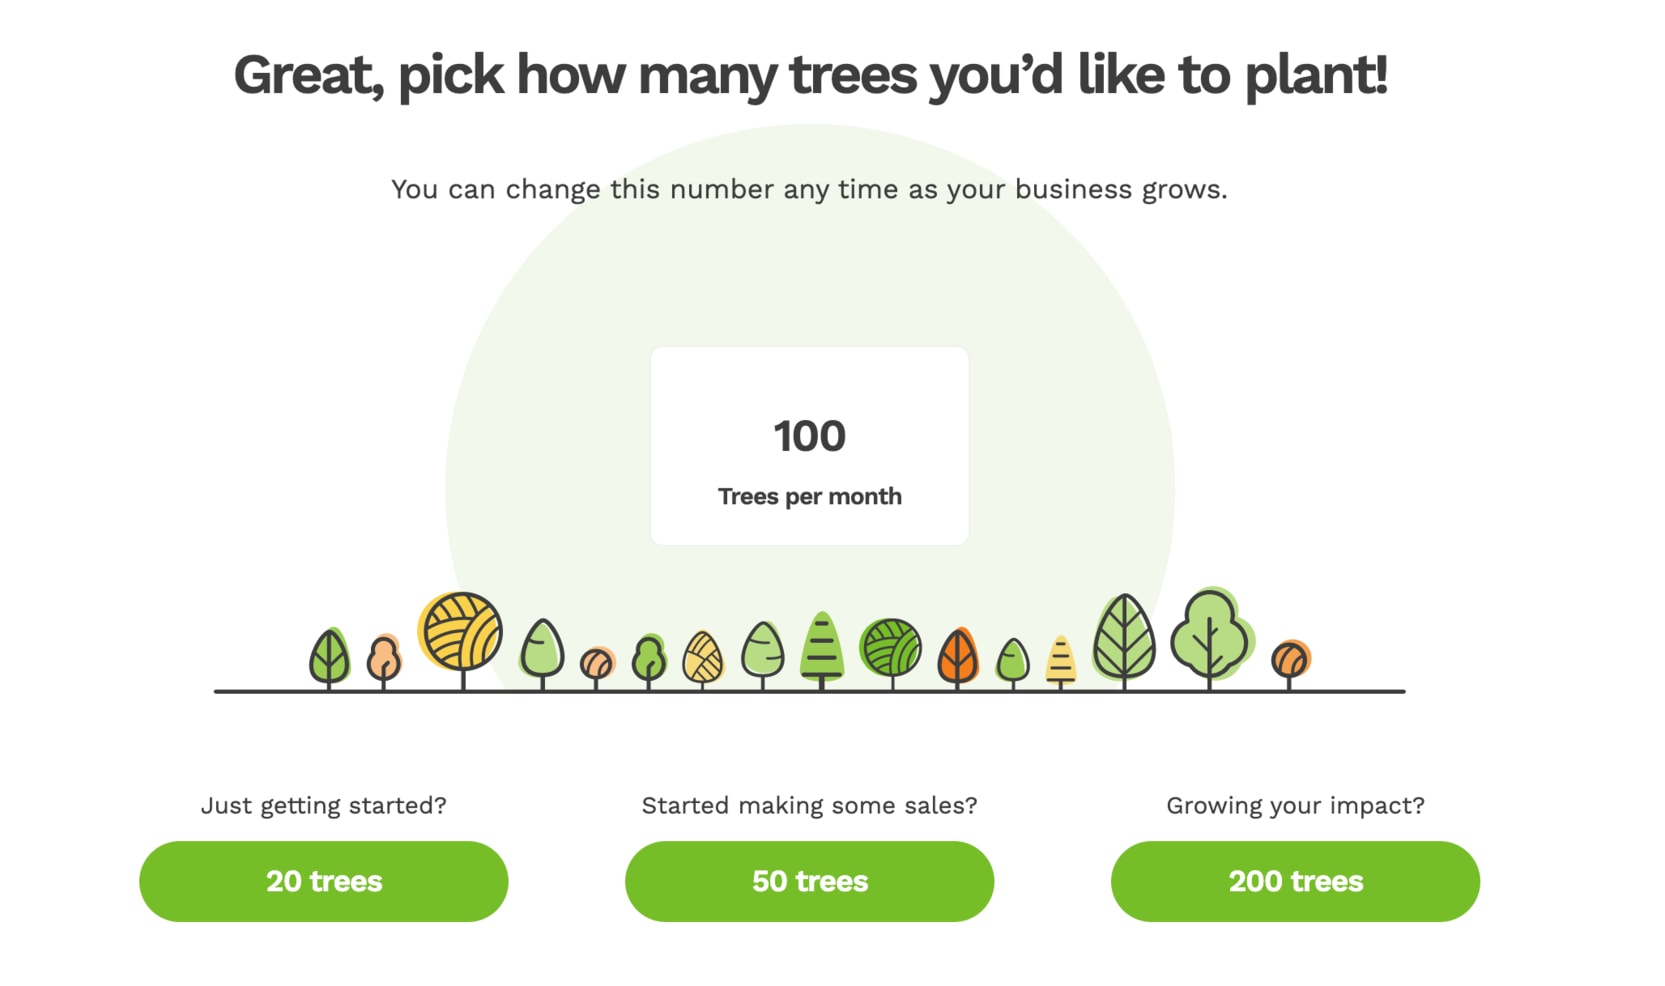 Photo: Plant Trees for My Company Package (Source: Treeapp)